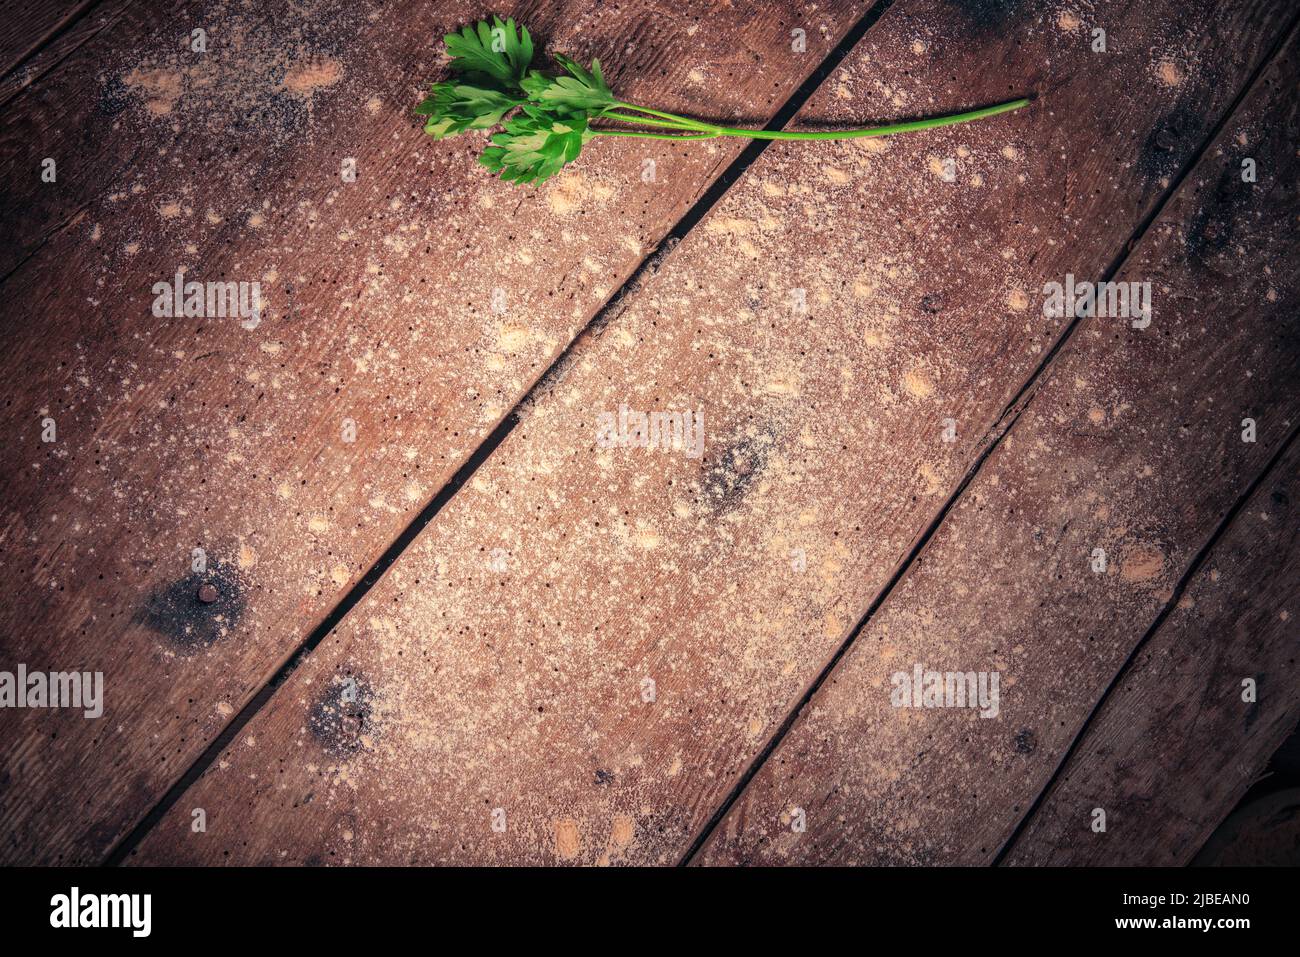 Vintage wooden table with flour and fresh herbs as food background Stock Photo